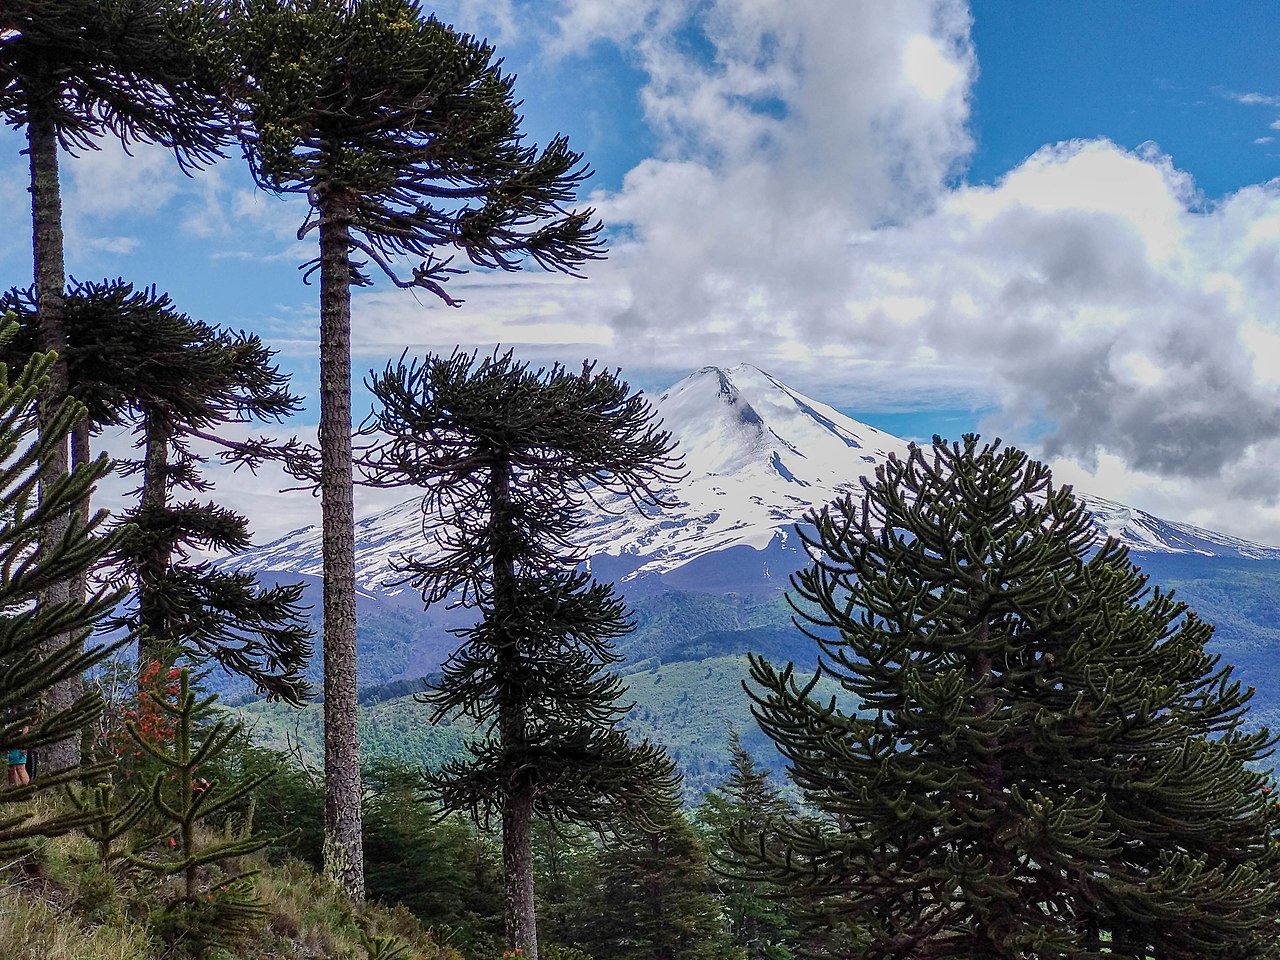 1280px-View_of_the_Llaima_Volcano_through_the_araucarias_from_the_viewpoint_%22Los_Condores%22_in_summer.jpg